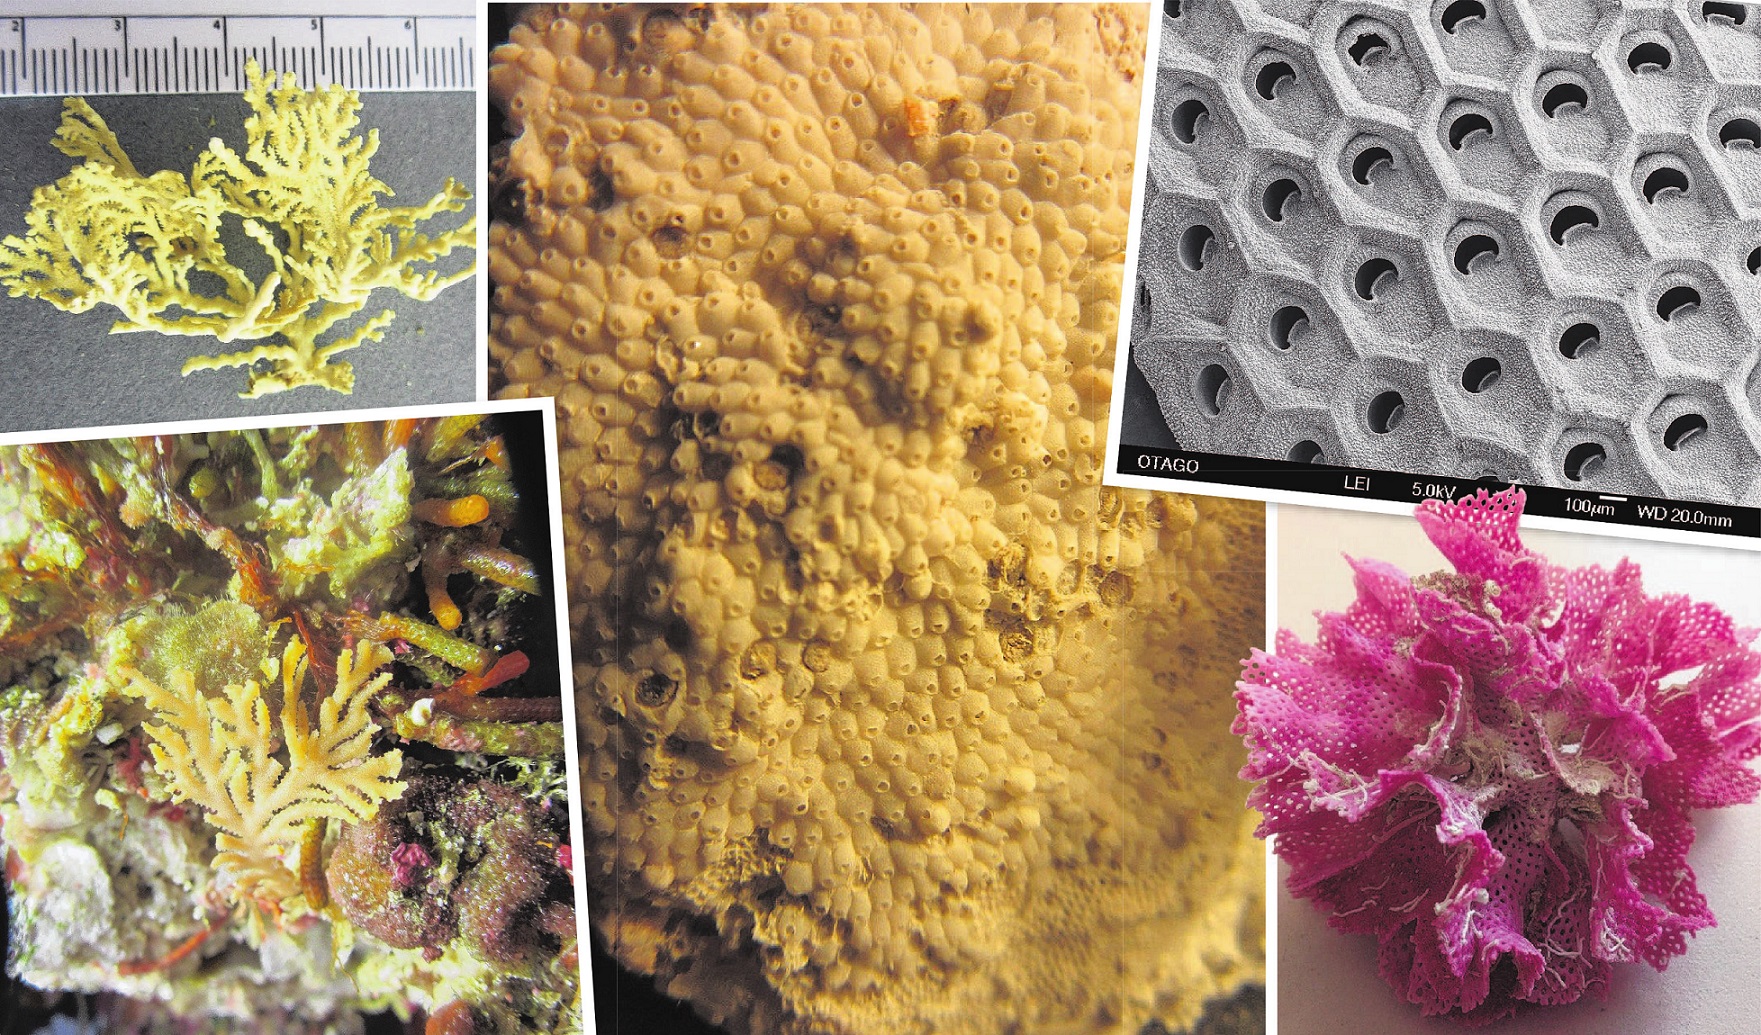 Bryozoans (clockwise from top left) Hornera robusta; Macropora grandis, showing the individual...